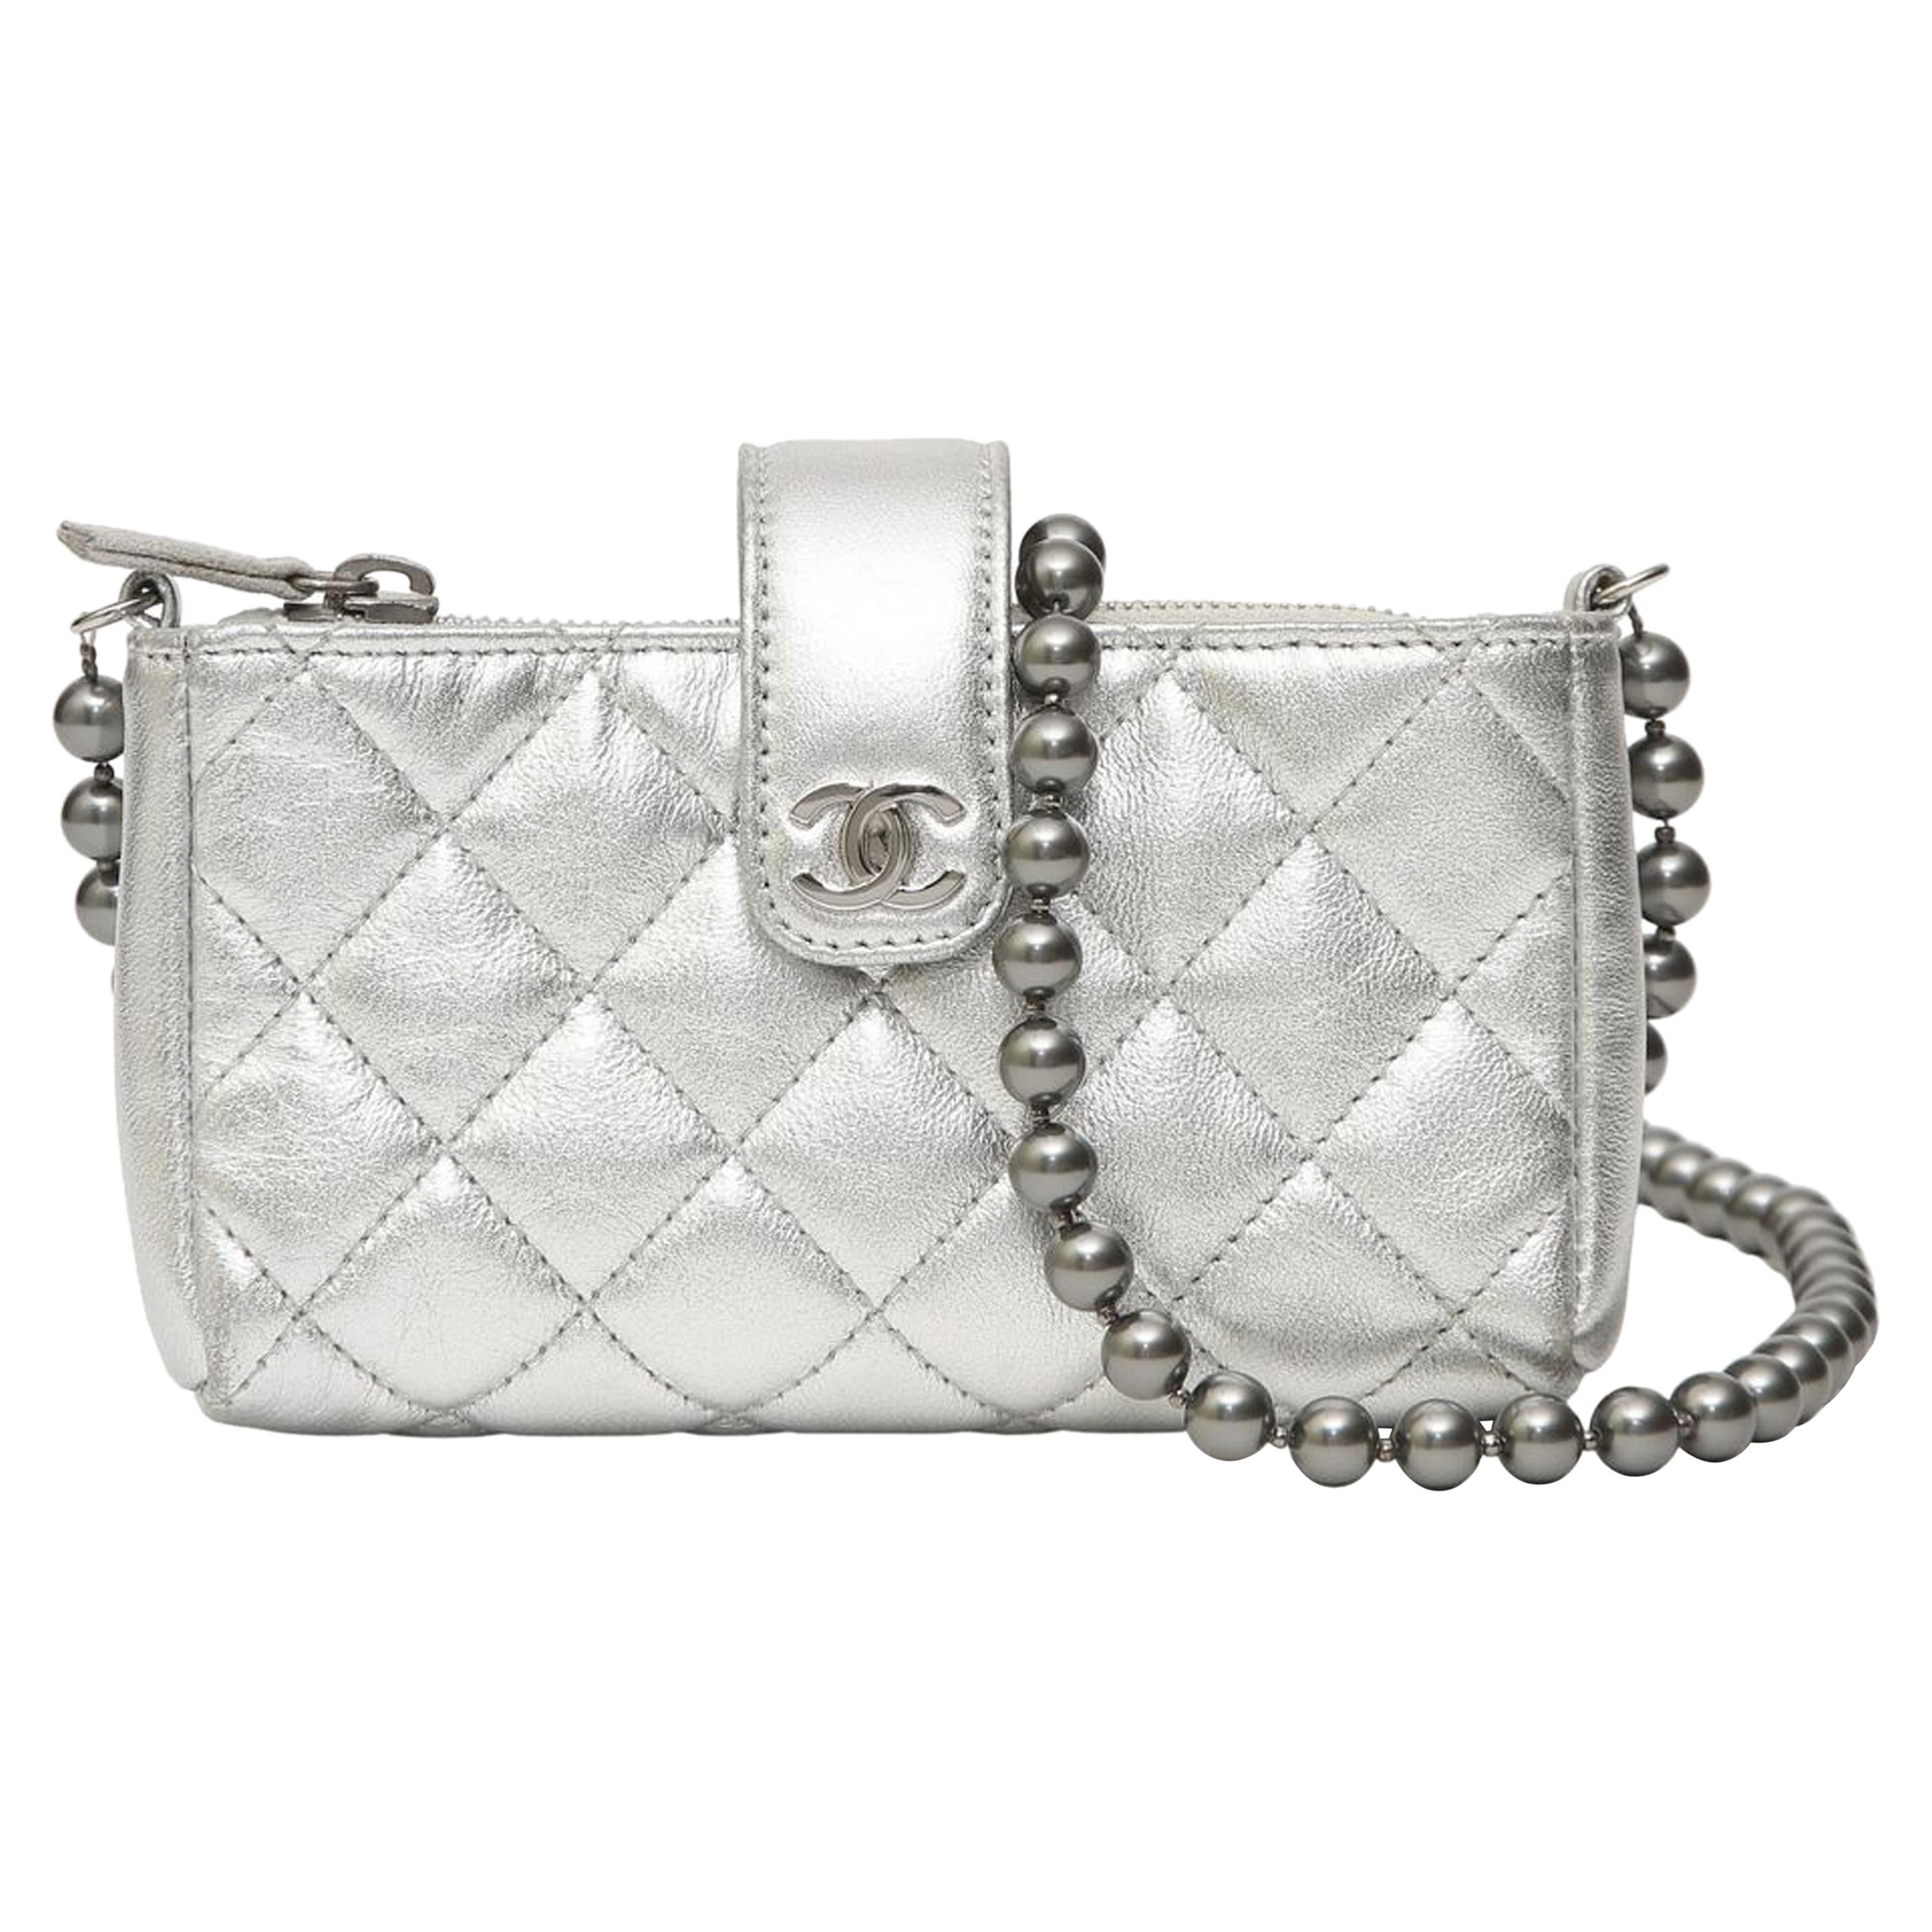 Chanel micro  silver calf leather shoulder bag